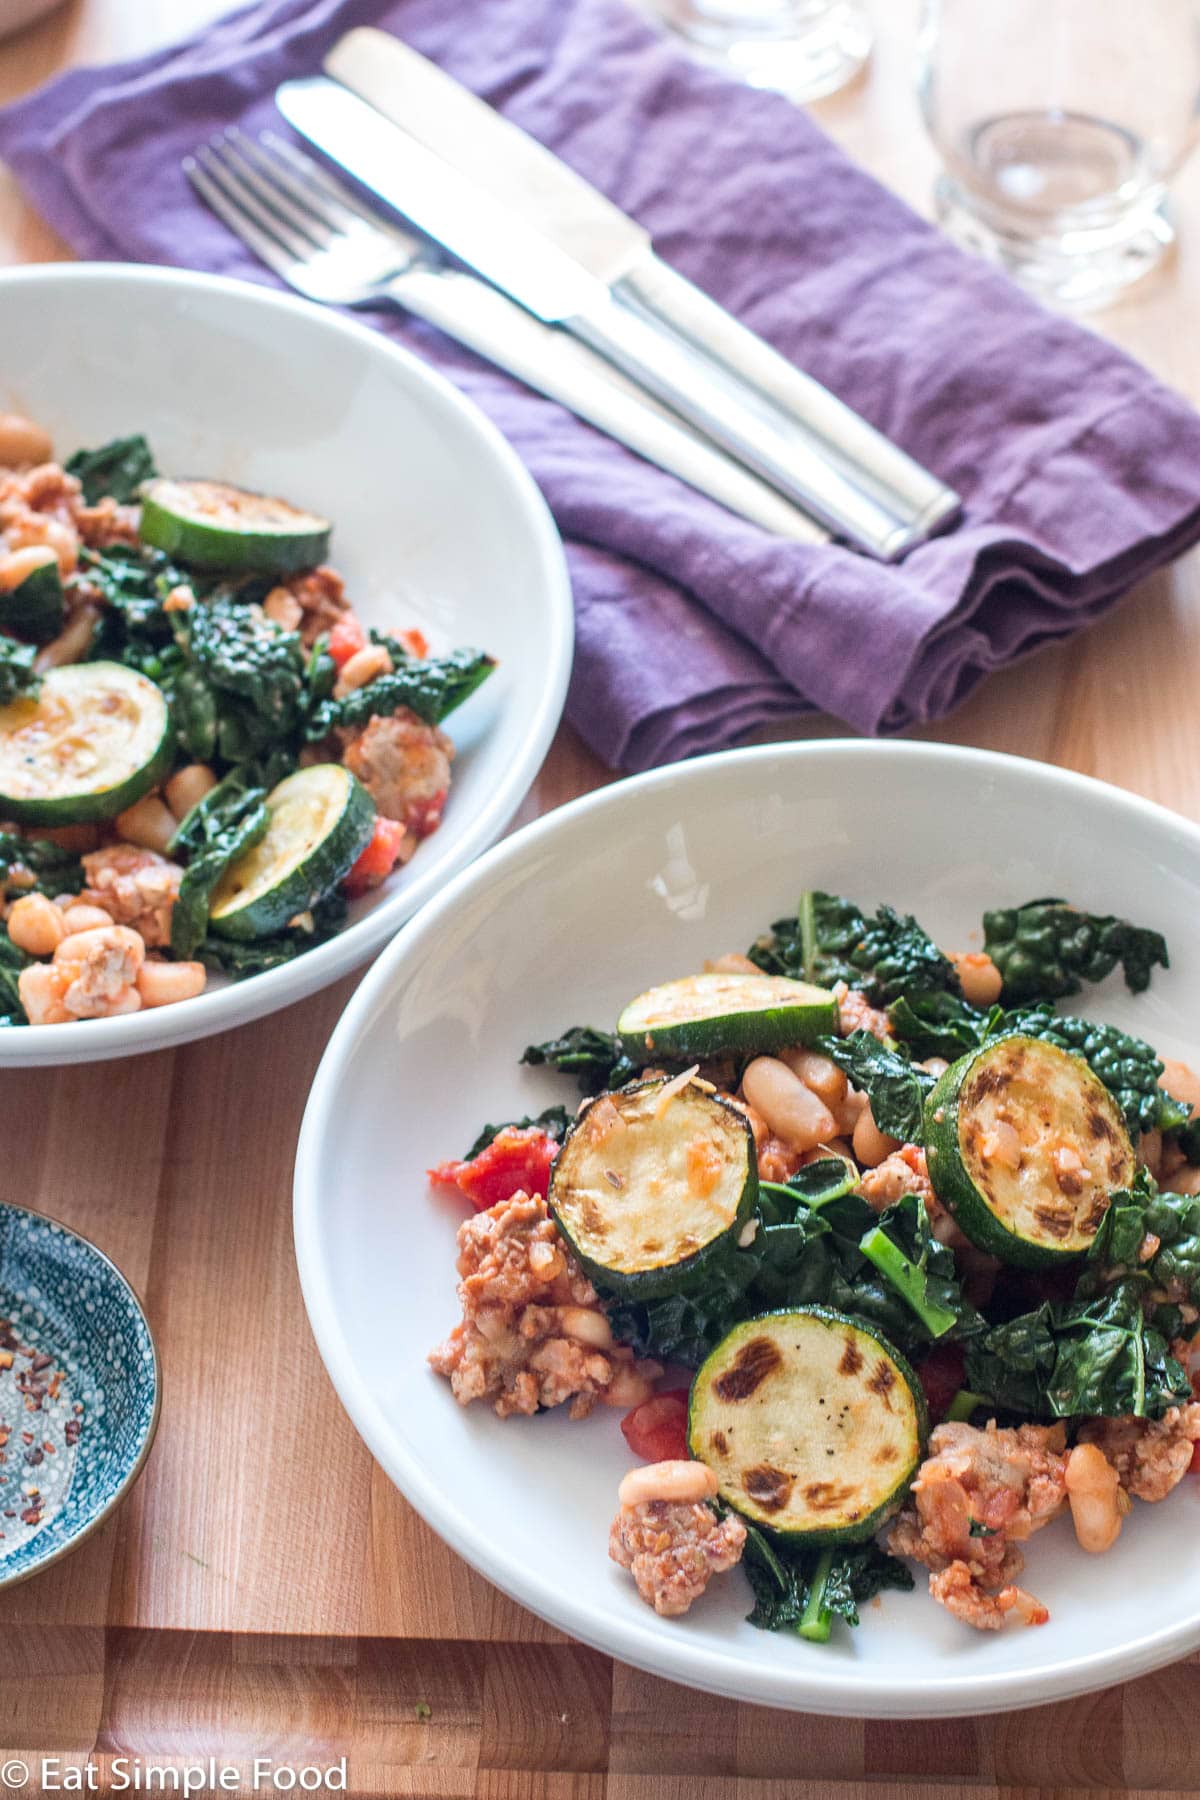 Side view of two plates of ragout: cooked sausage, sliced seared zucchini, chopped kale, white beans, and tomato. Side of hot chili flakes on the side. Napkins, silverware, and glasses in background.